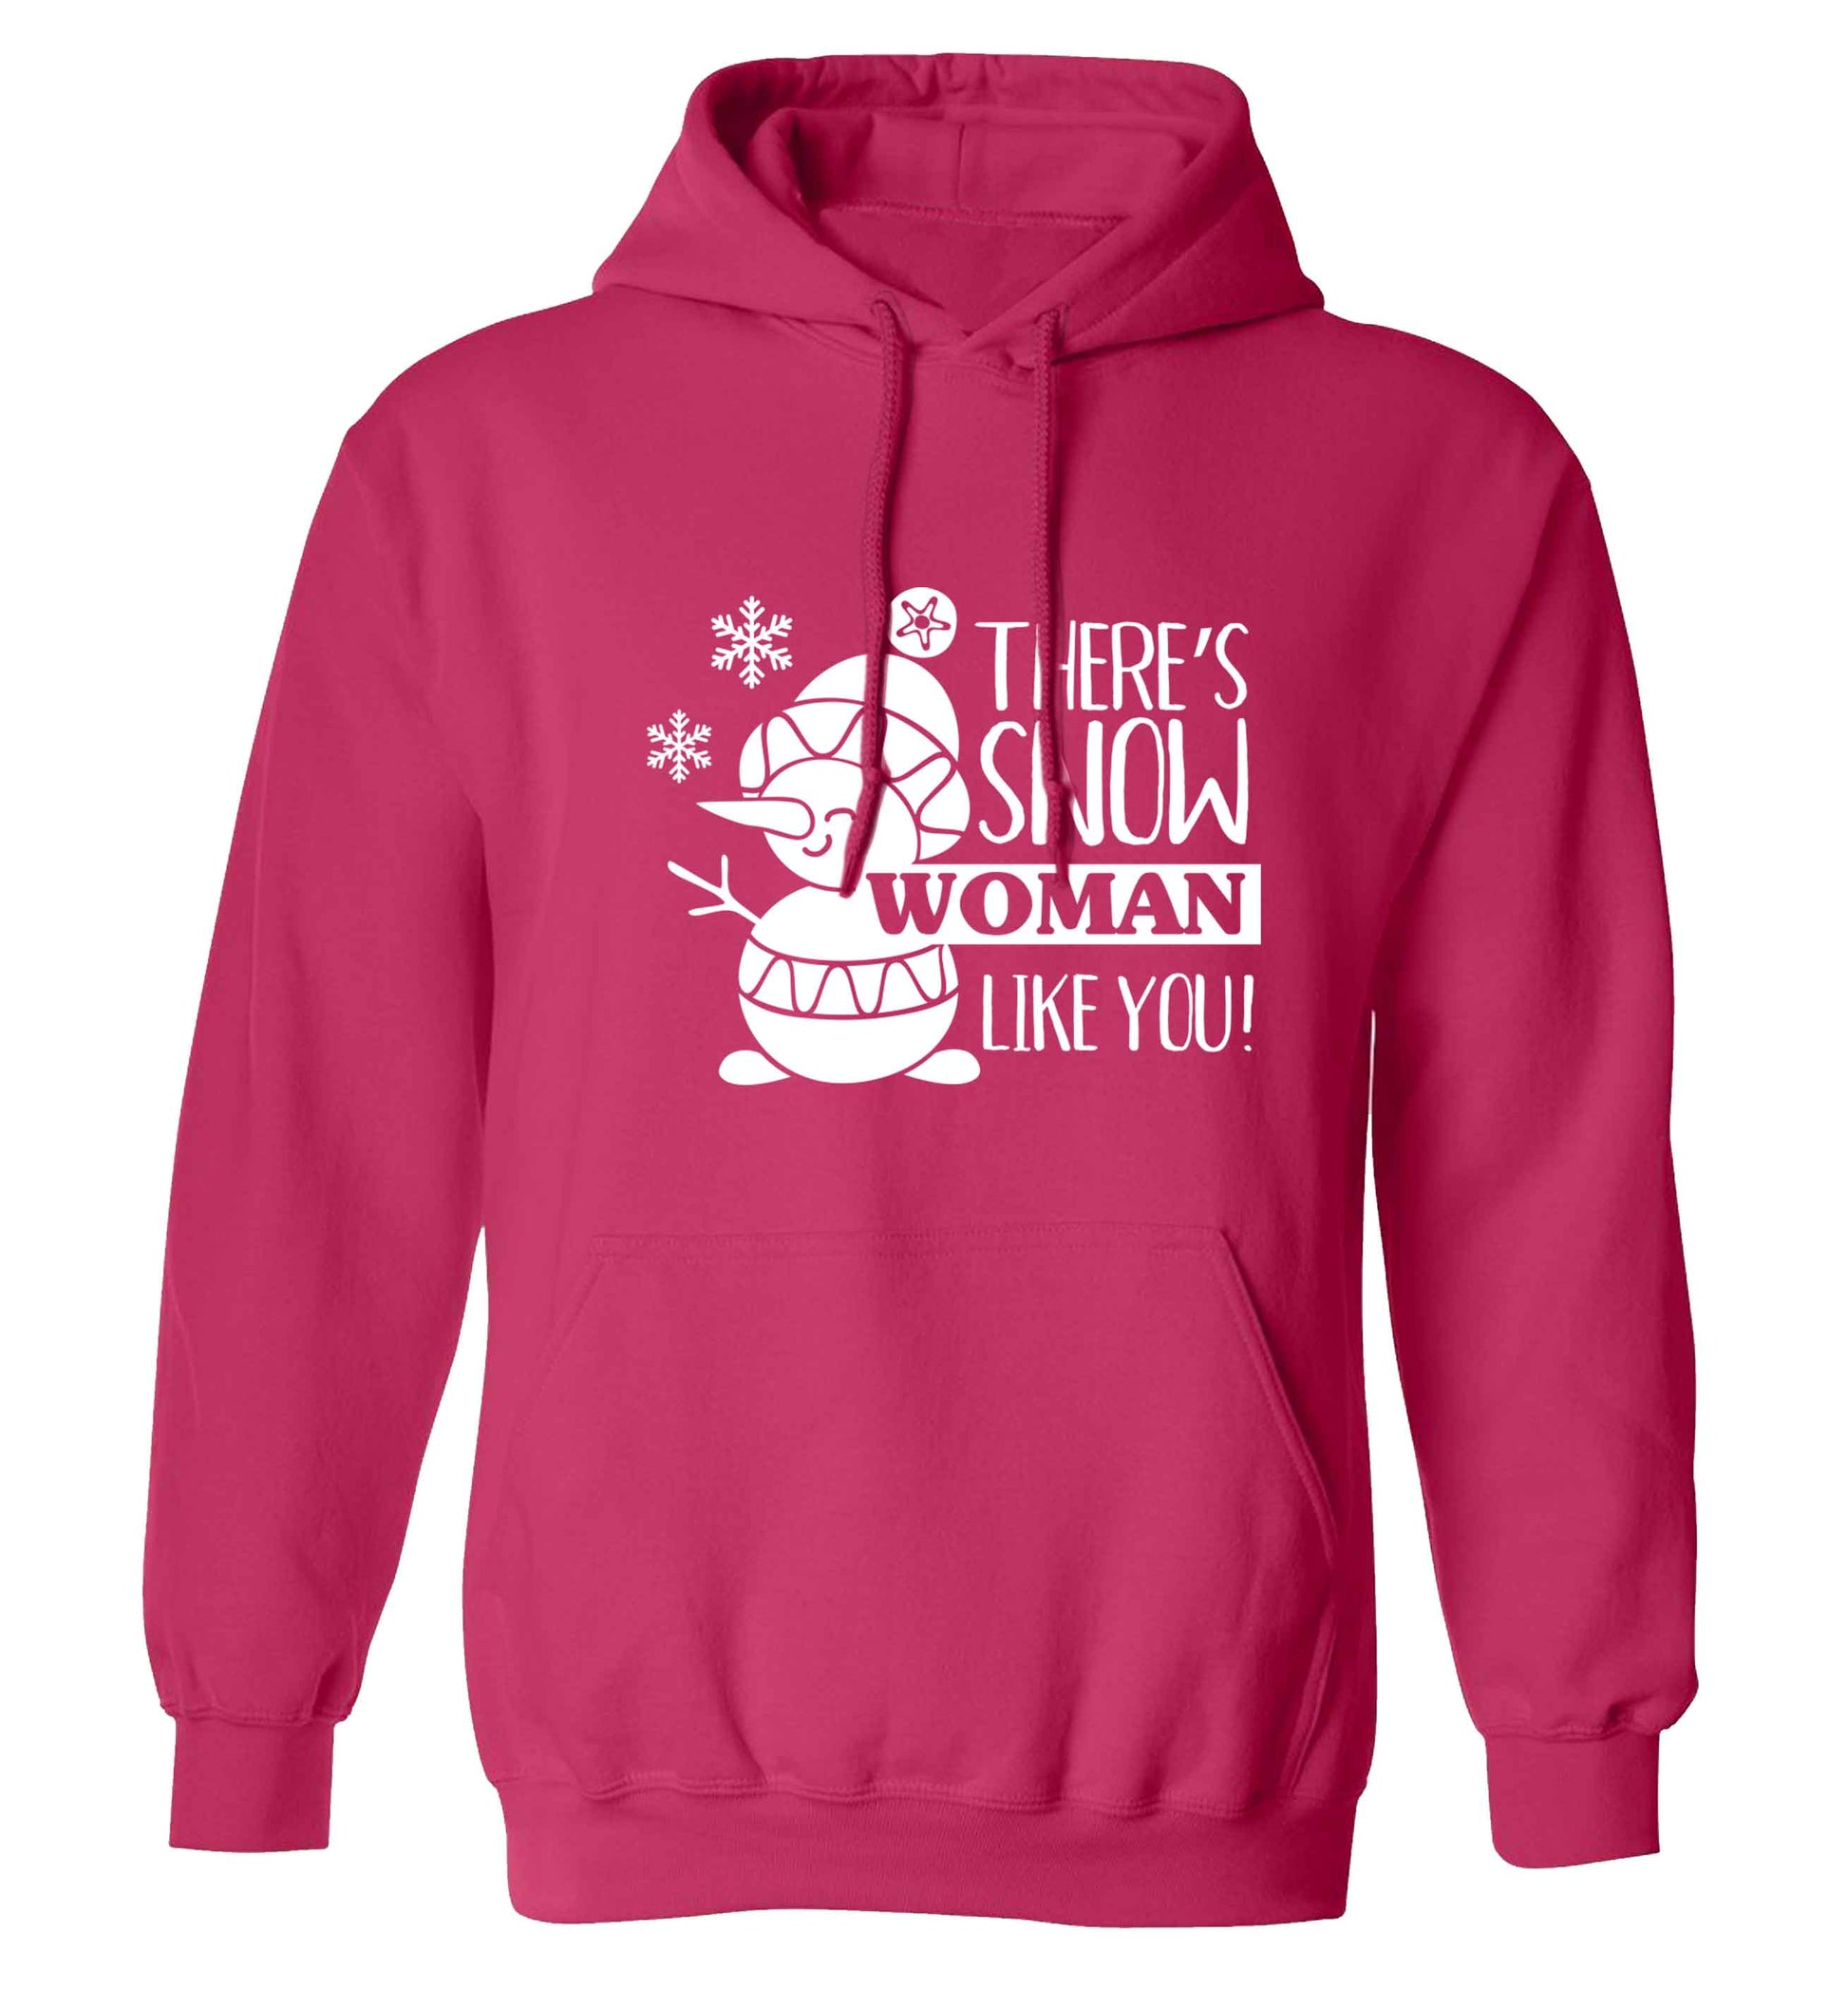 There's snow woman like you adults unisex pink hoodie 2XL